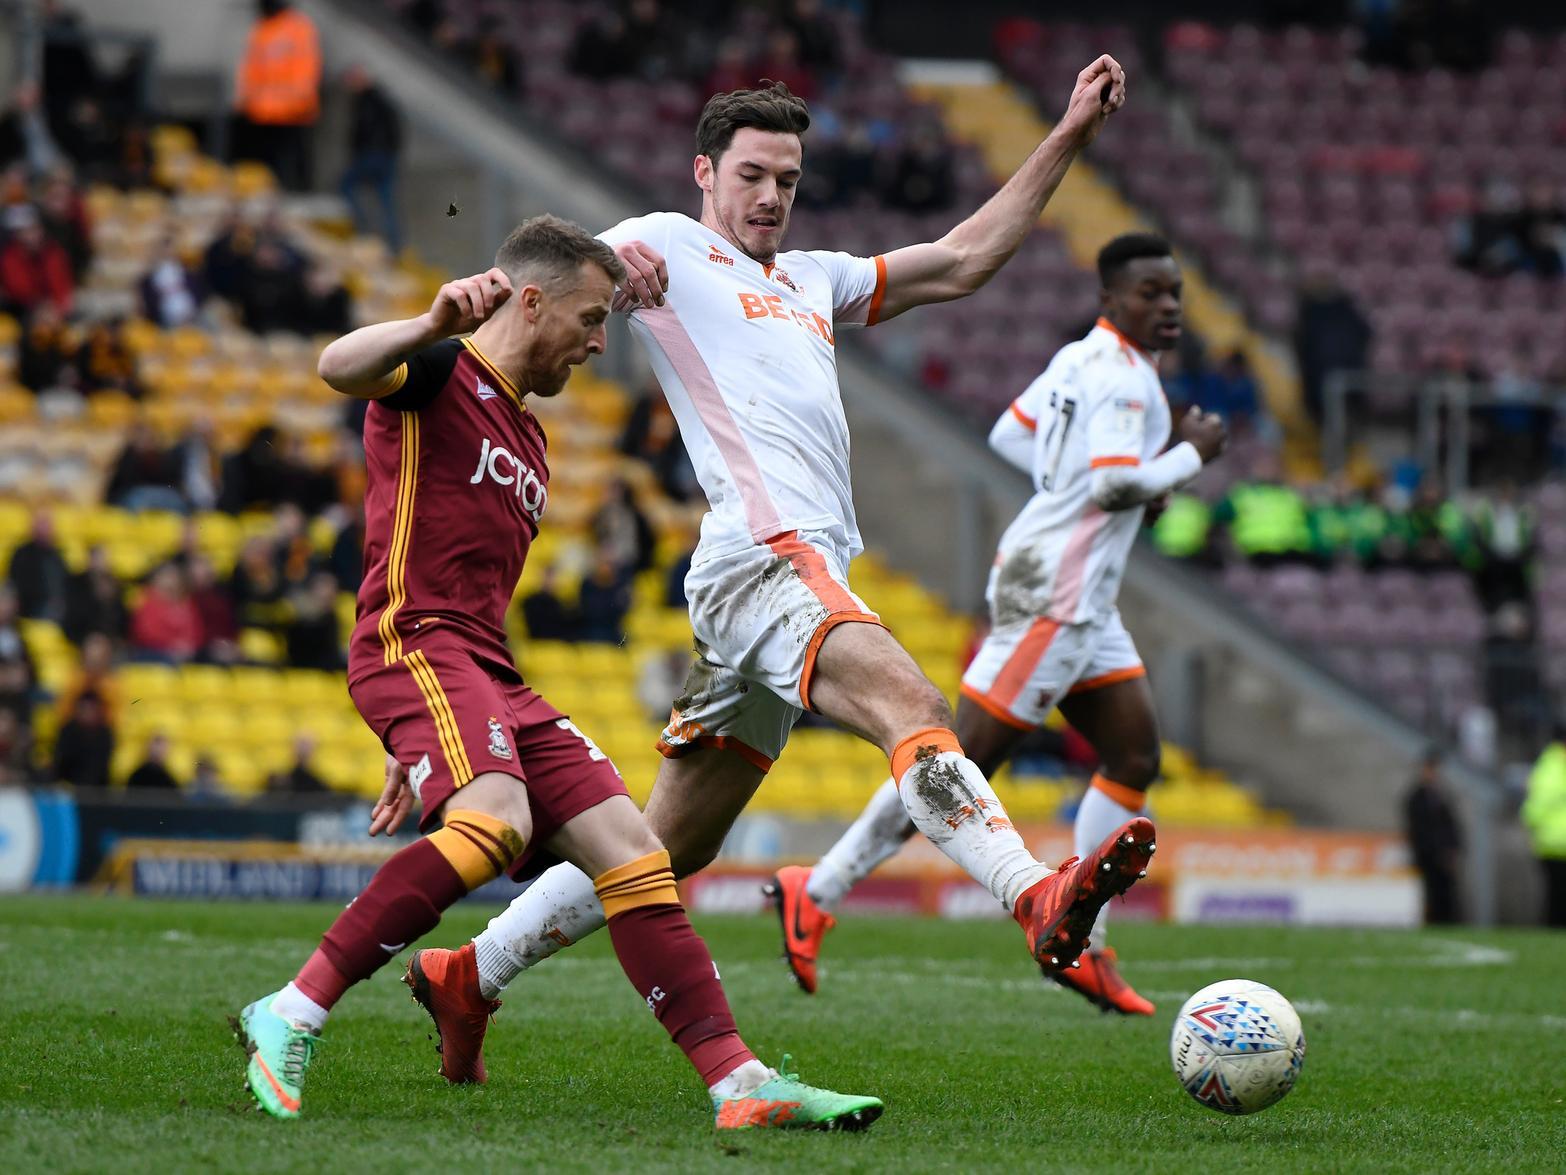 Luton Town are said to be in 'pole position' to sign Sheffield United defender Ben Heneghan, despite Hatters boss Graham Jones playing down talk of a deal last weekend. (The 72)